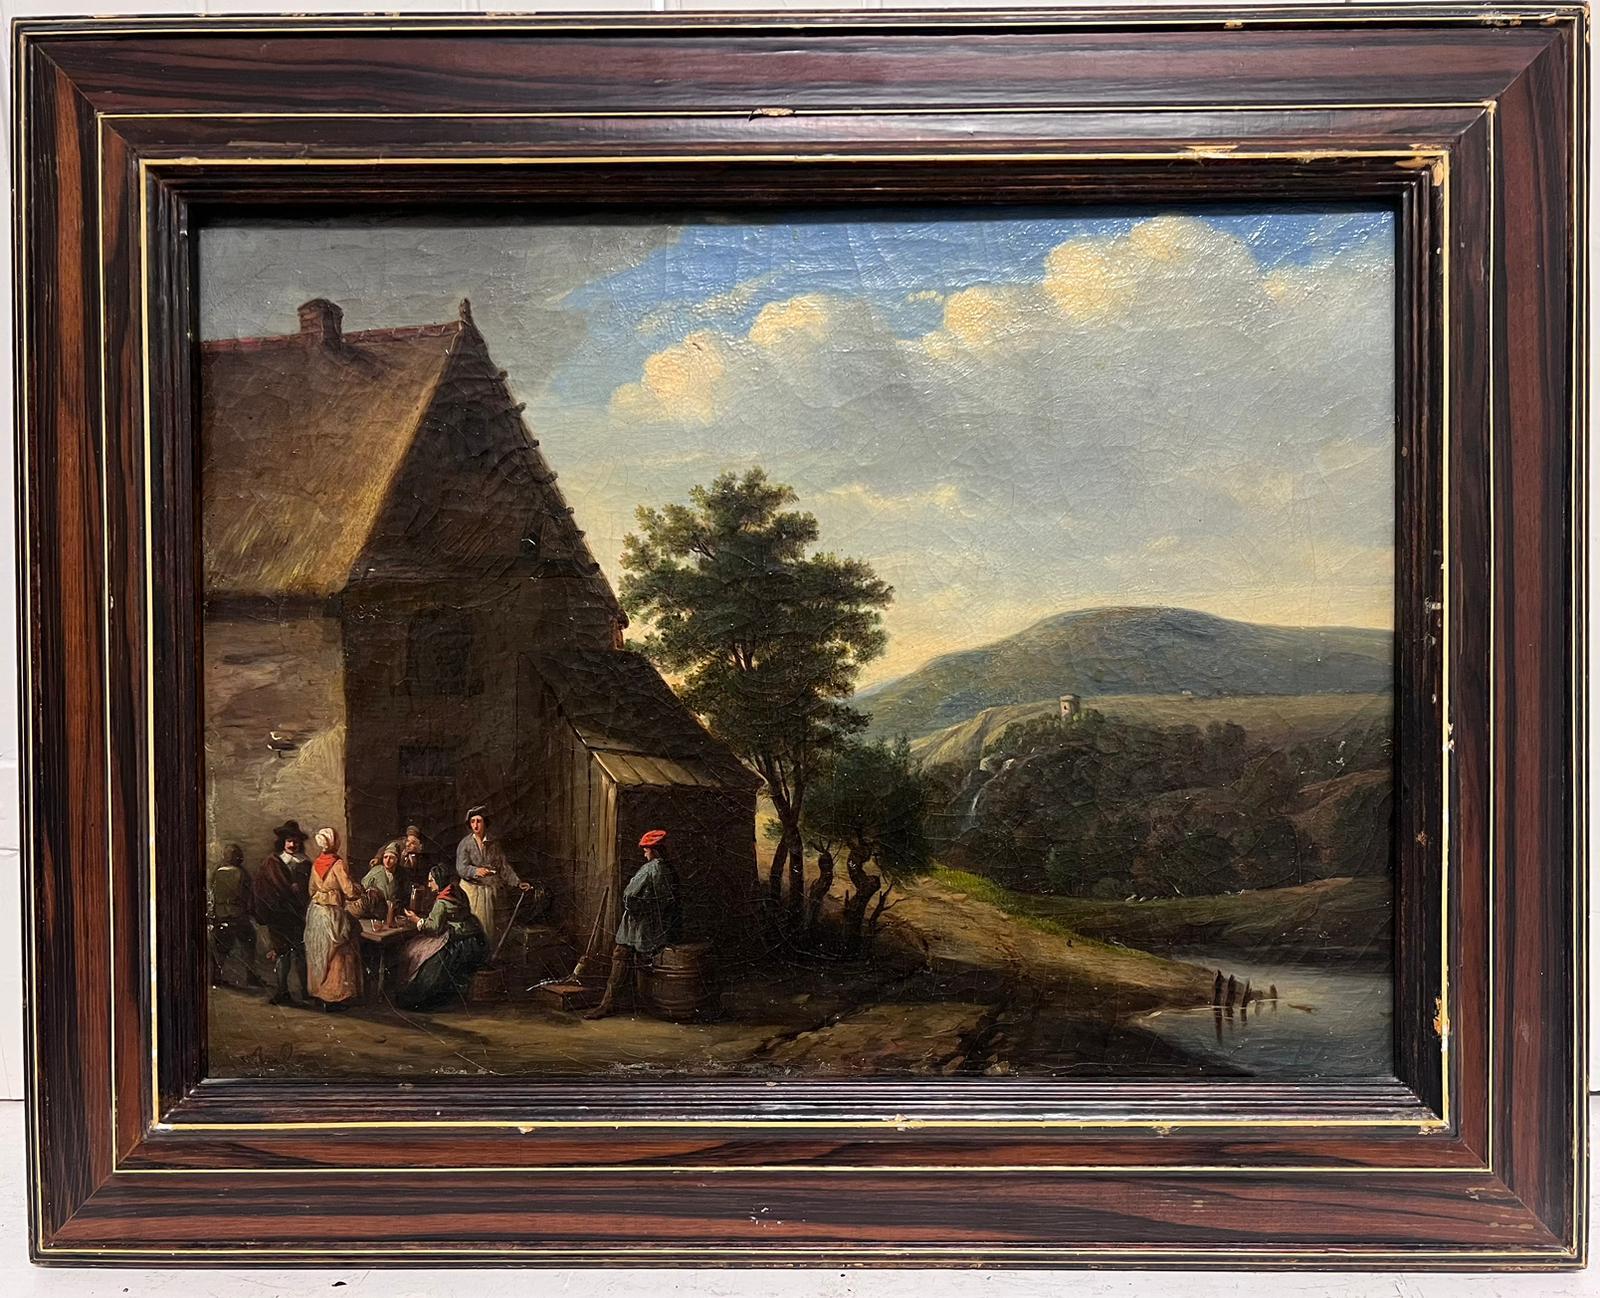 Figures Chatting outside Village Tavern in Mountain Landscape, Period Oil  - Painting by 19th century Dutch or Flemish school